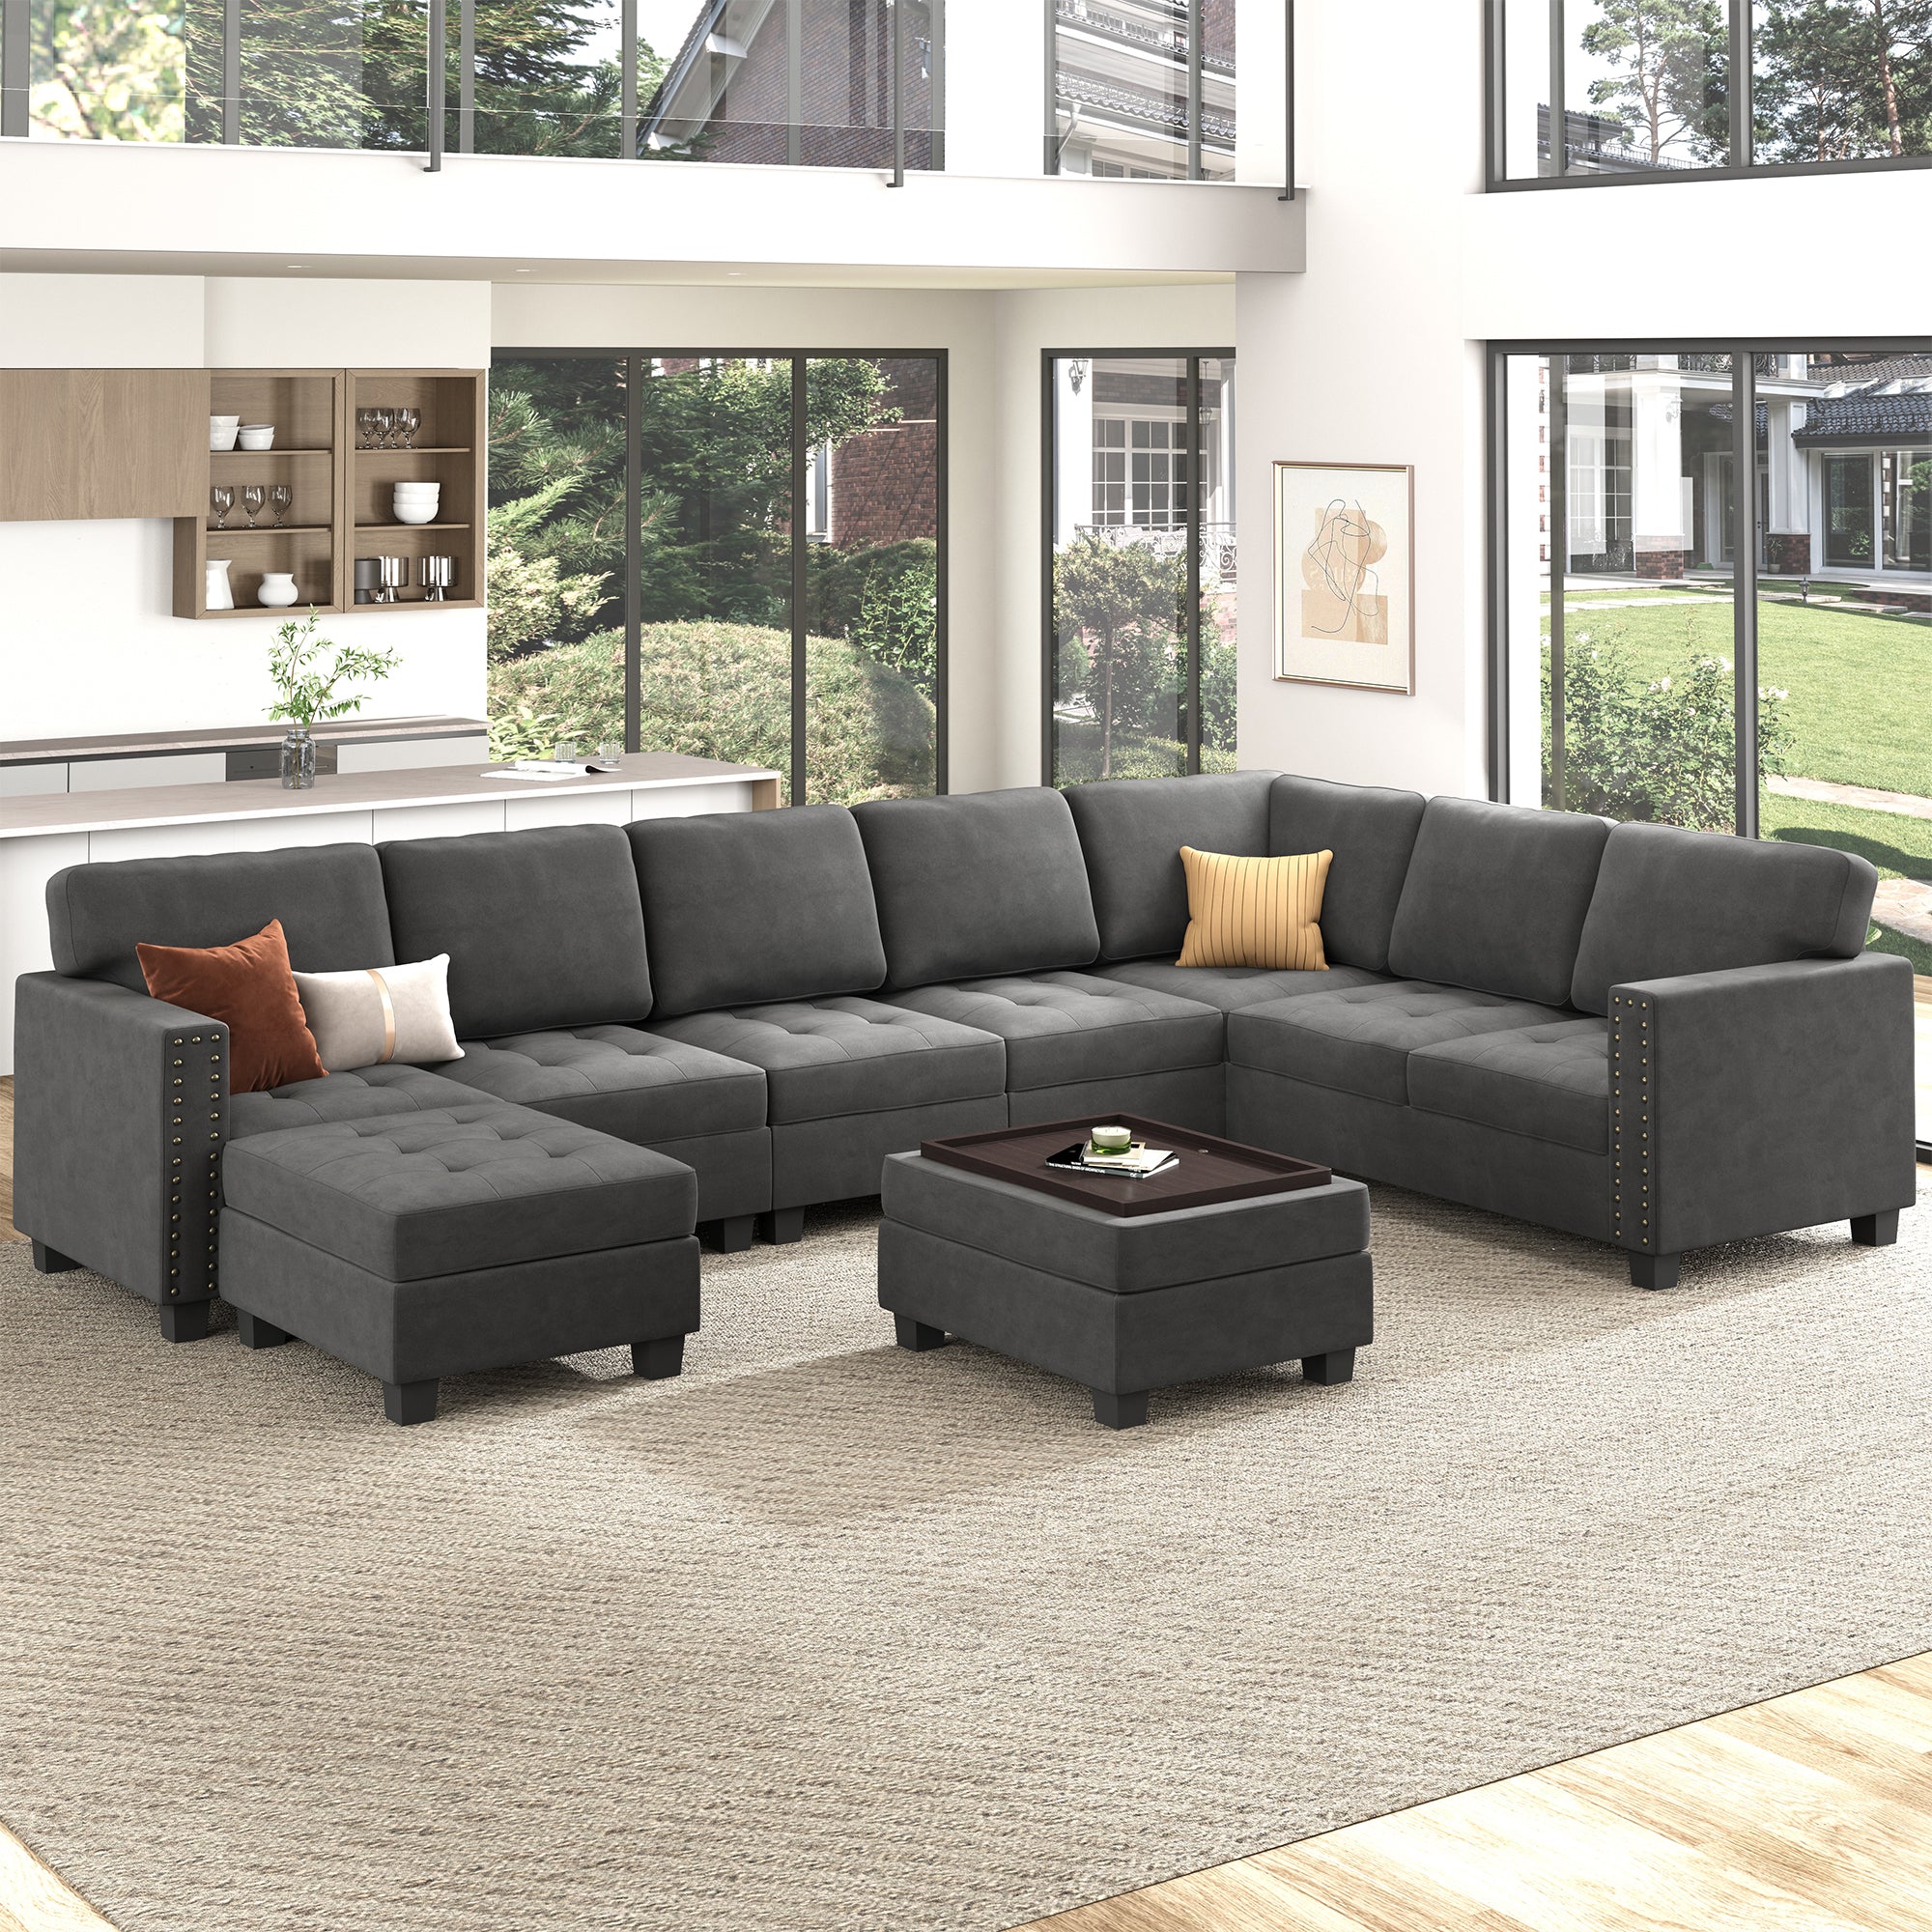 HONBAY Velvet Sectional Couch, U Shaped Sectional Sofa with Chaise Modular Sectional with Storage Ottoman for Living Room #Color_Greyn